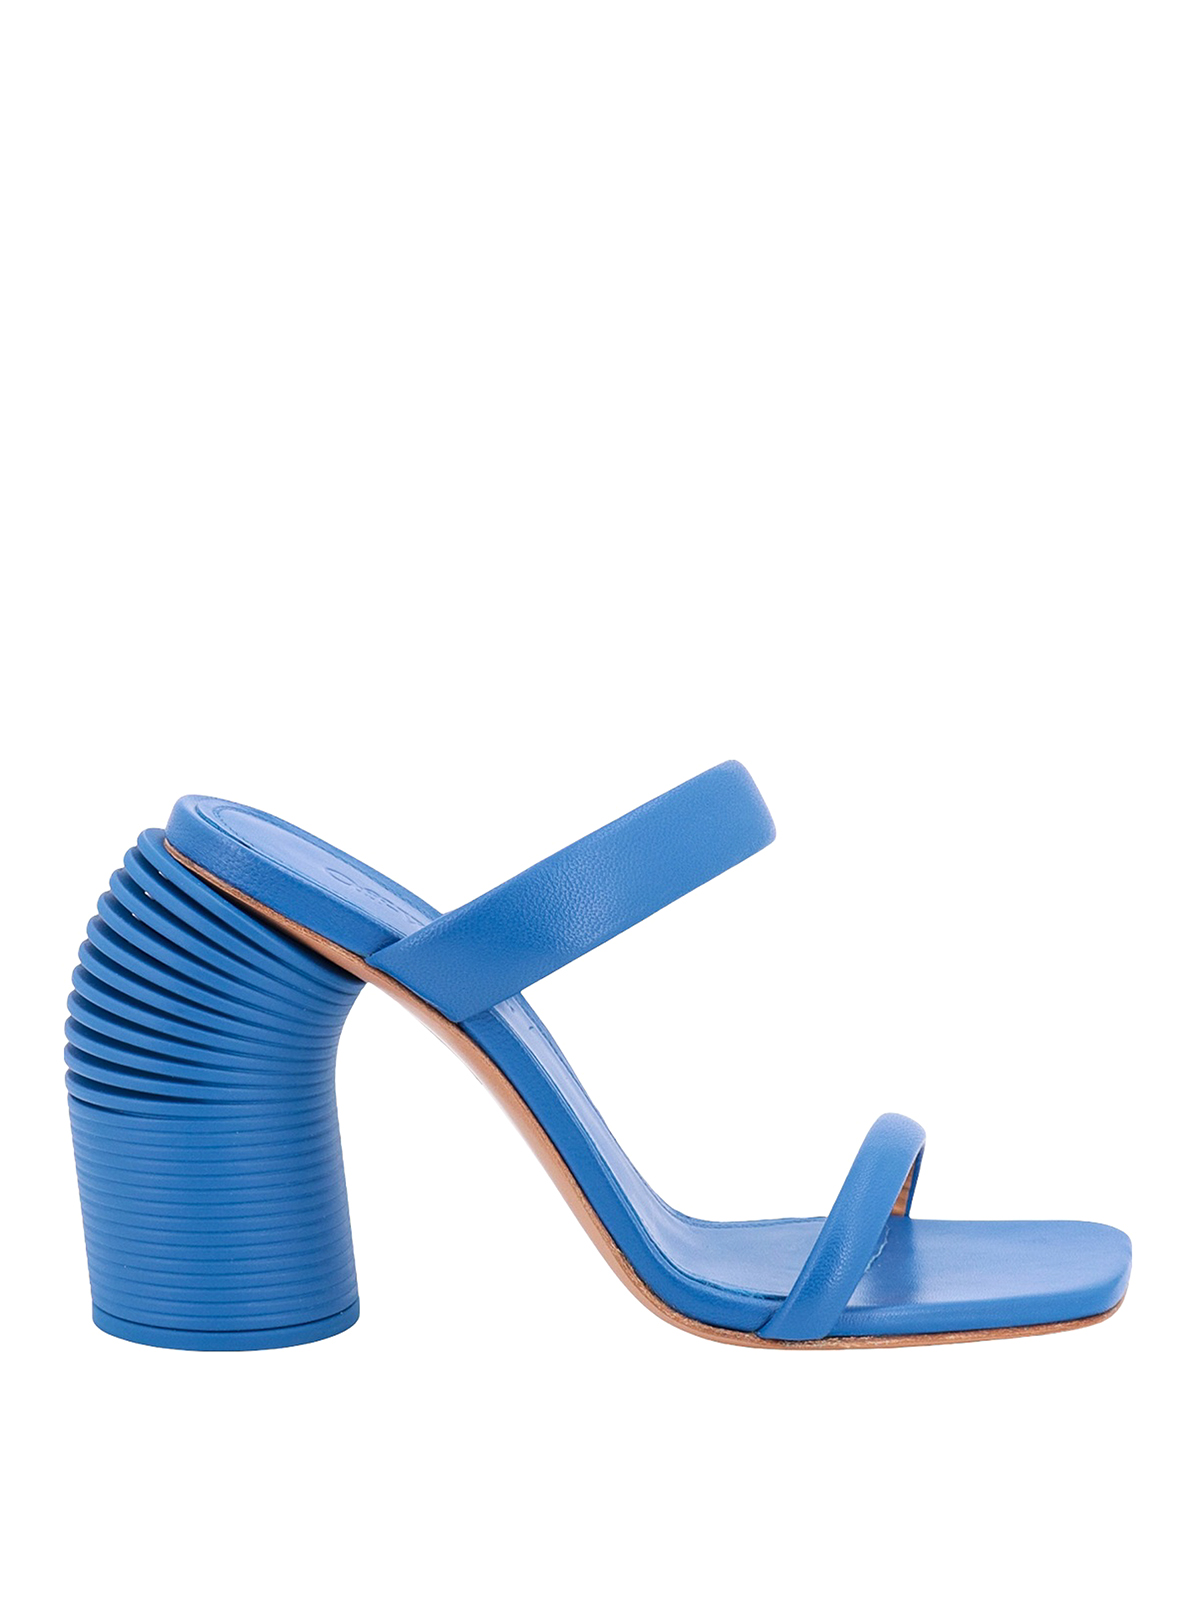 Off-white Leather Sandals With Spring Heel In Blue